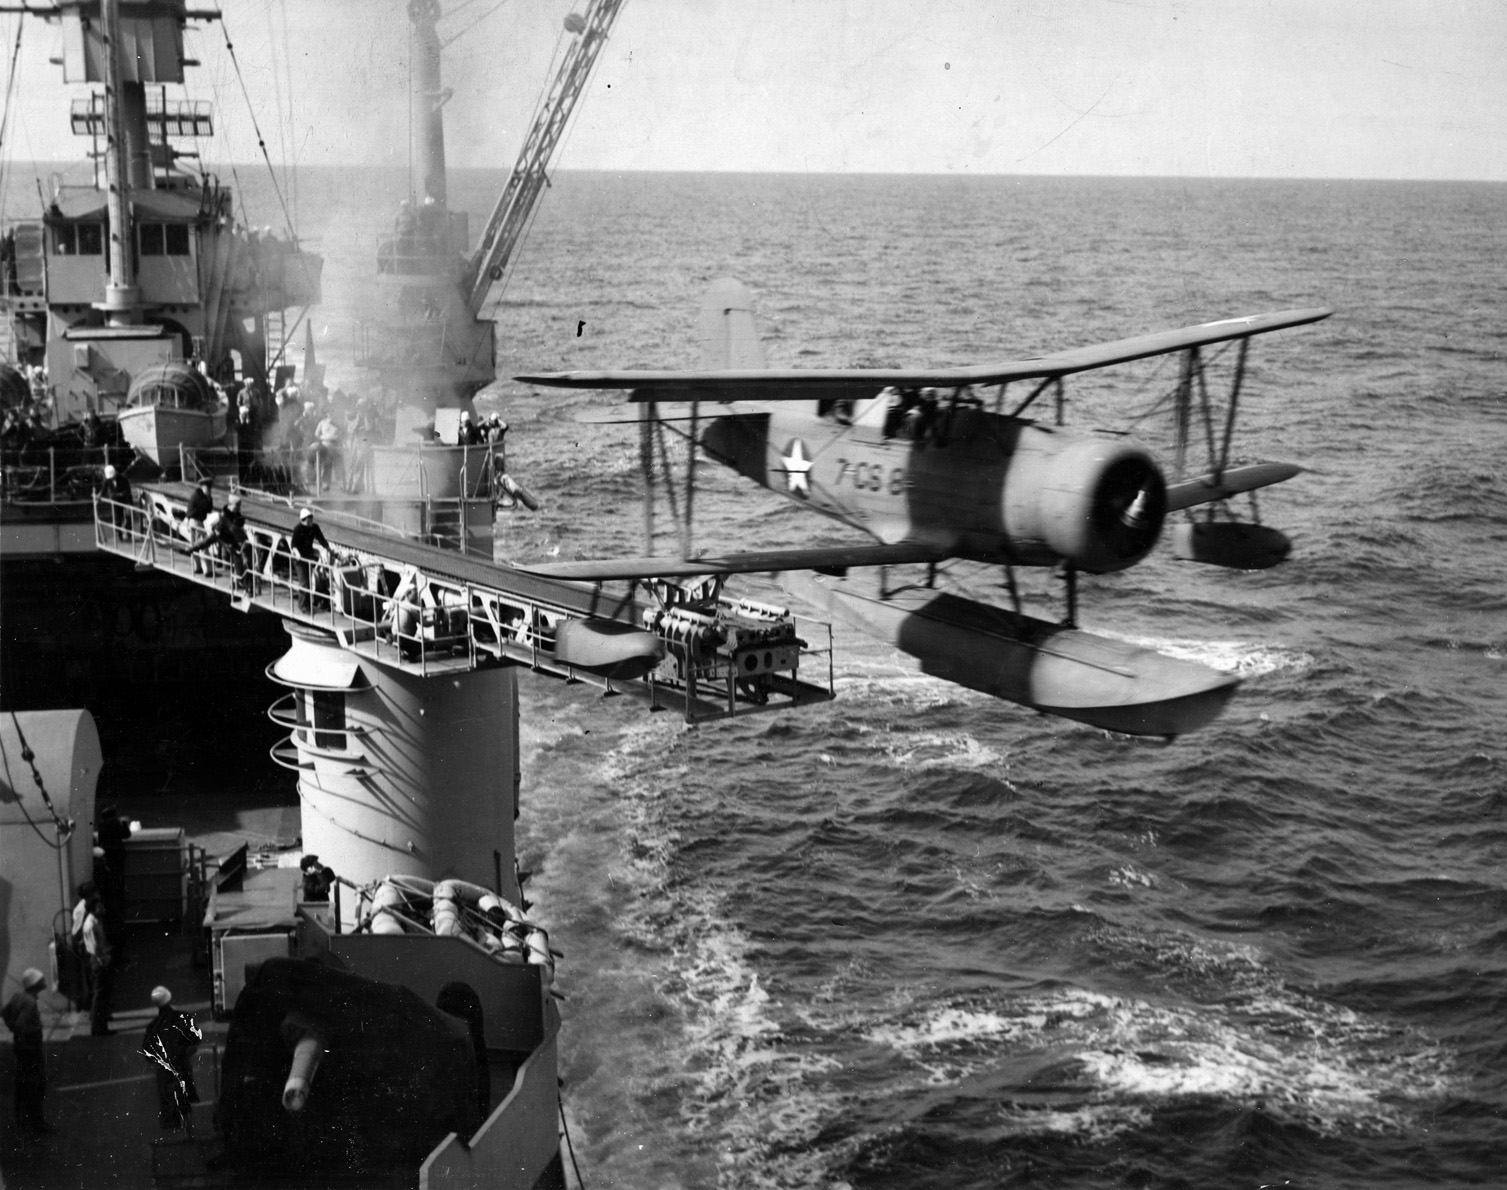 A Curtiss SOC-3 Seagull careens from the catapult aboard the heavy cruiser USS New Orleans in 1943. The Seagull was replaced by the Vought OS2U Kingfisher as the war progressed.